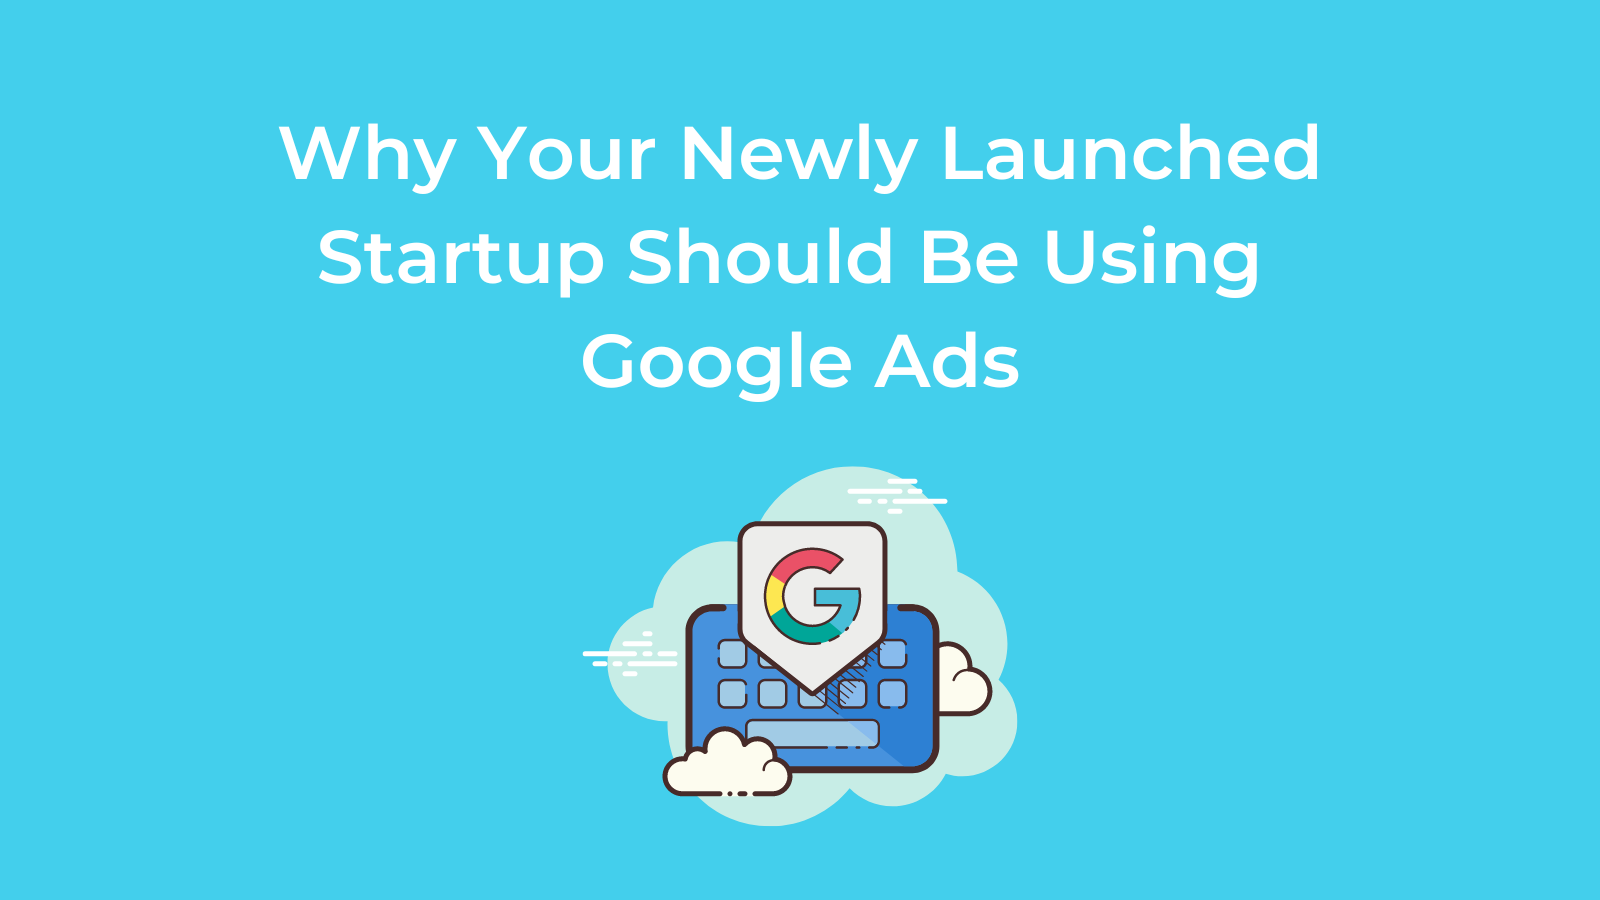 Why Your Newly Launched Startup Should Be Using Google Ads